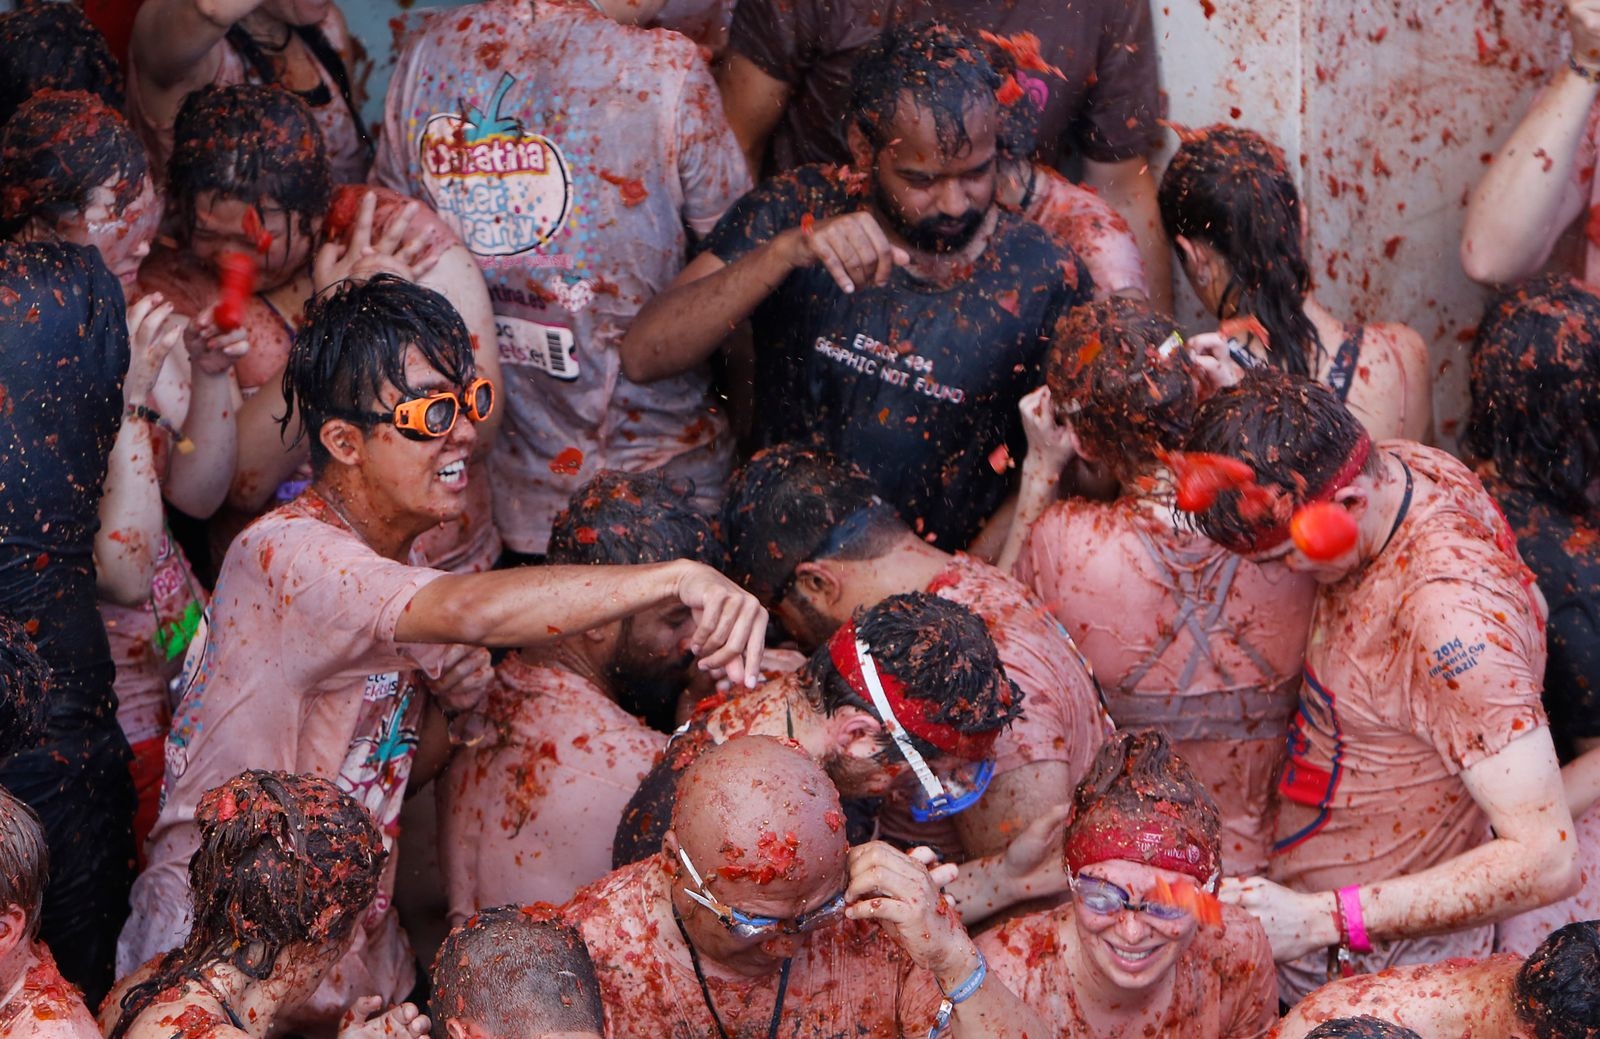 Revelers throw tomatoes at each other, during the annual "Tomatina", tomato fight fiesta, in the village of Bunol, 50 kilometers outside Valencia, Spain, Wednesday, Aug. 29, 2018. At the annual "Tomatina" battle, that has become a major tourist attraction, trucks dumped 160 tons of tomatoes for some 20,000 participants, many from abroad, to throw during the hour-long Wednesday morning festivities. (AP Photo/Alberto Saiz)